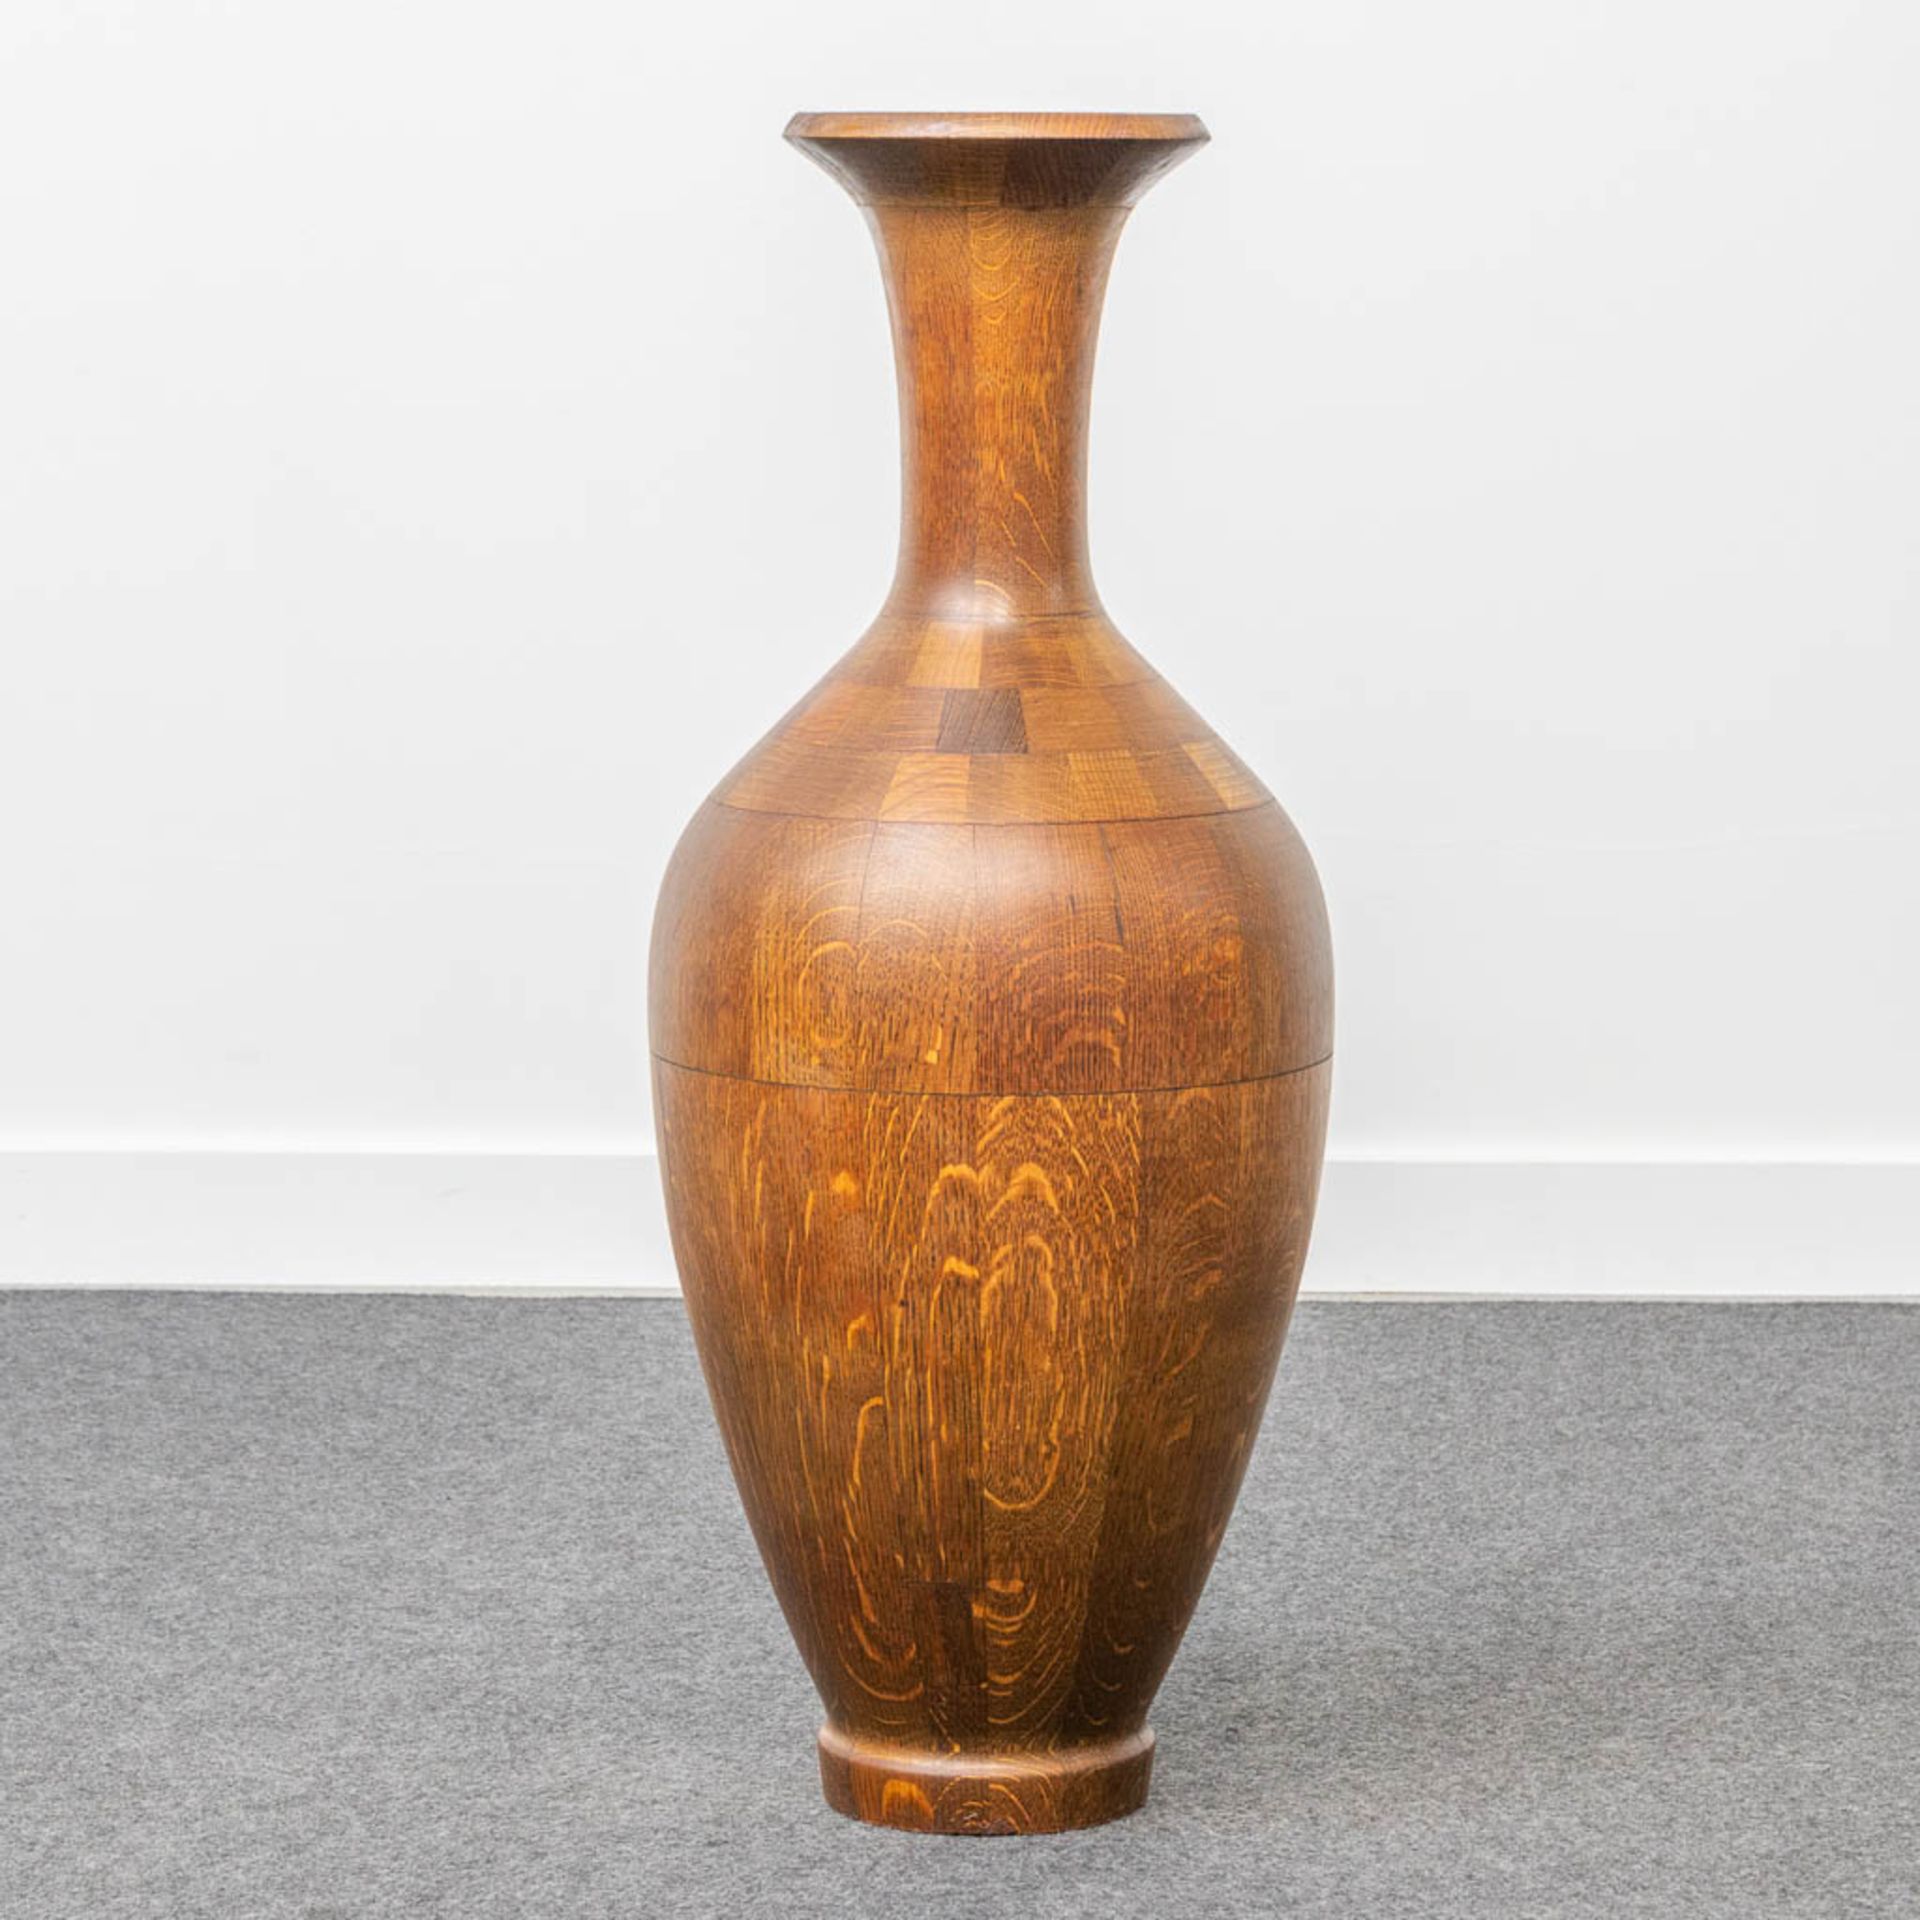 A collection of 4 wood-turned vases with inlay, made by DeCoene in Kortijk, Belgium. - Image 8 of 11